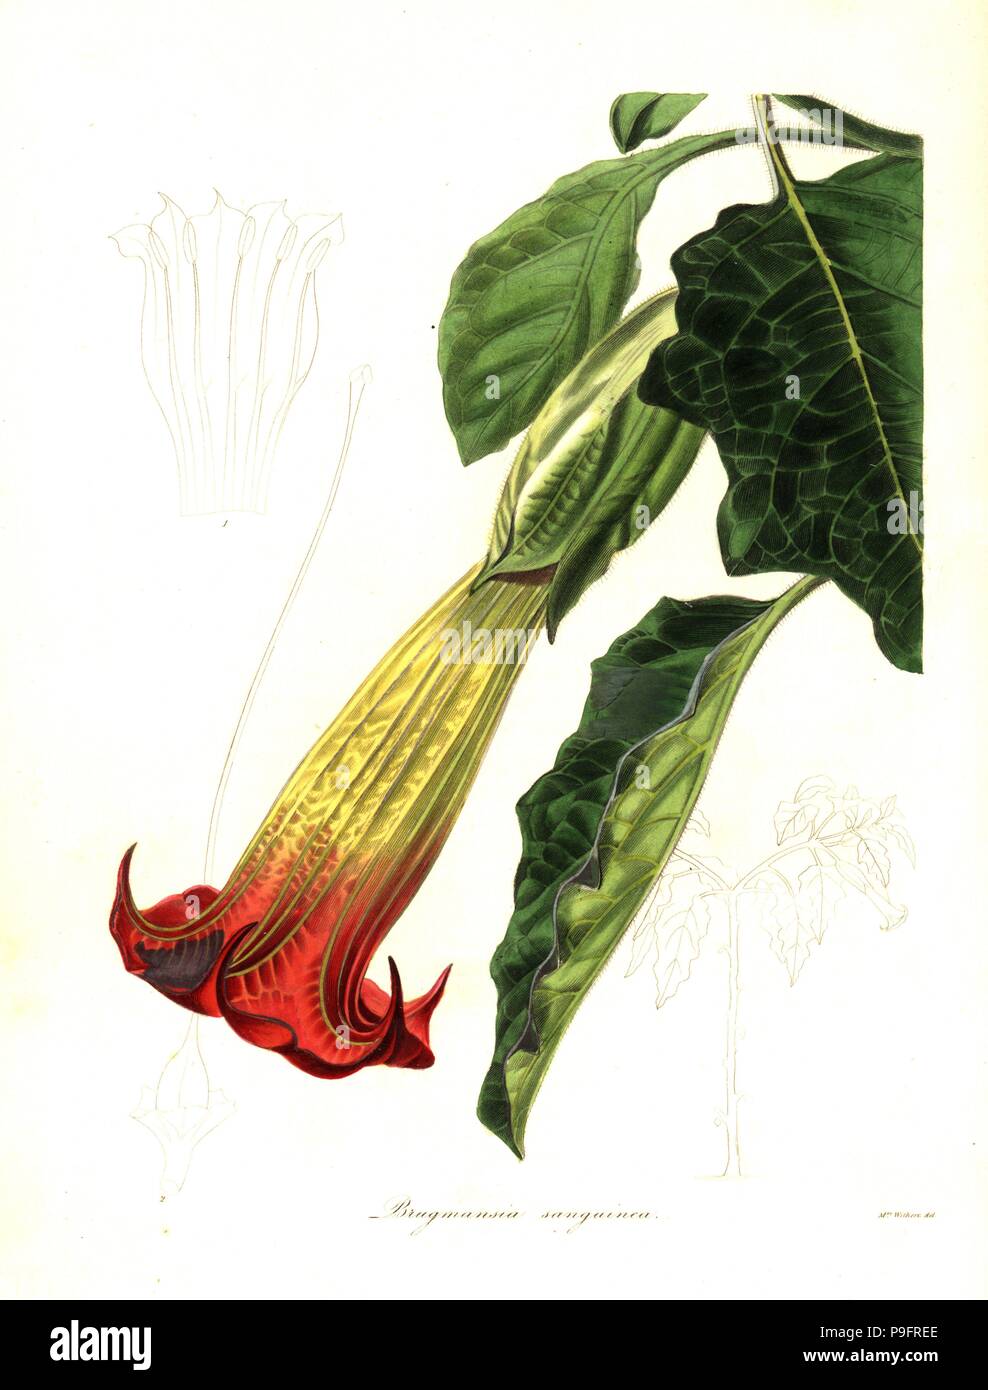 Blood-coloured brugmansia, Brugmansia sanguinea. Handcoloured copperplate engraving after a botanical illustration by Mrs Augusta Withers from Benjamin Maund and the Rev. John Stevens Henslow's The Botanist, London, 1836. Stock Photo